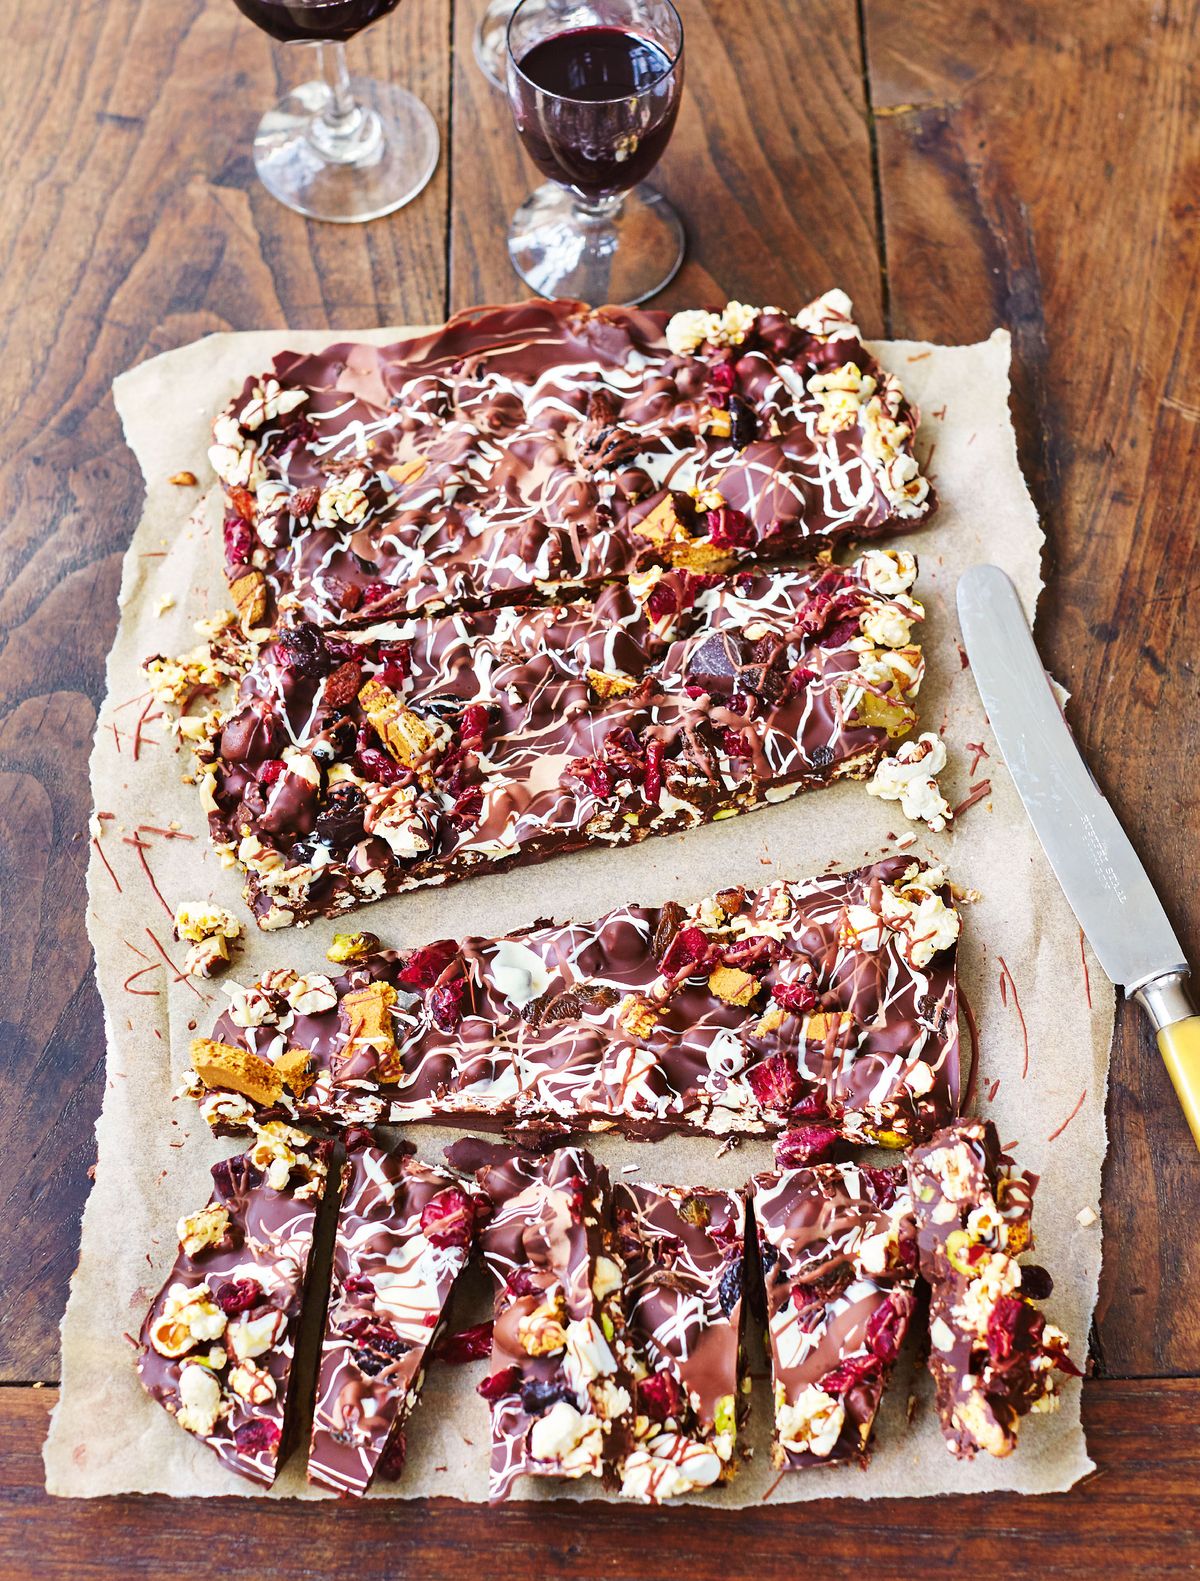 Jamie Oliver’s Rocky Road with Popcorn, Nuts, Clementine, Ginger, Soured Fruit and Chocolate